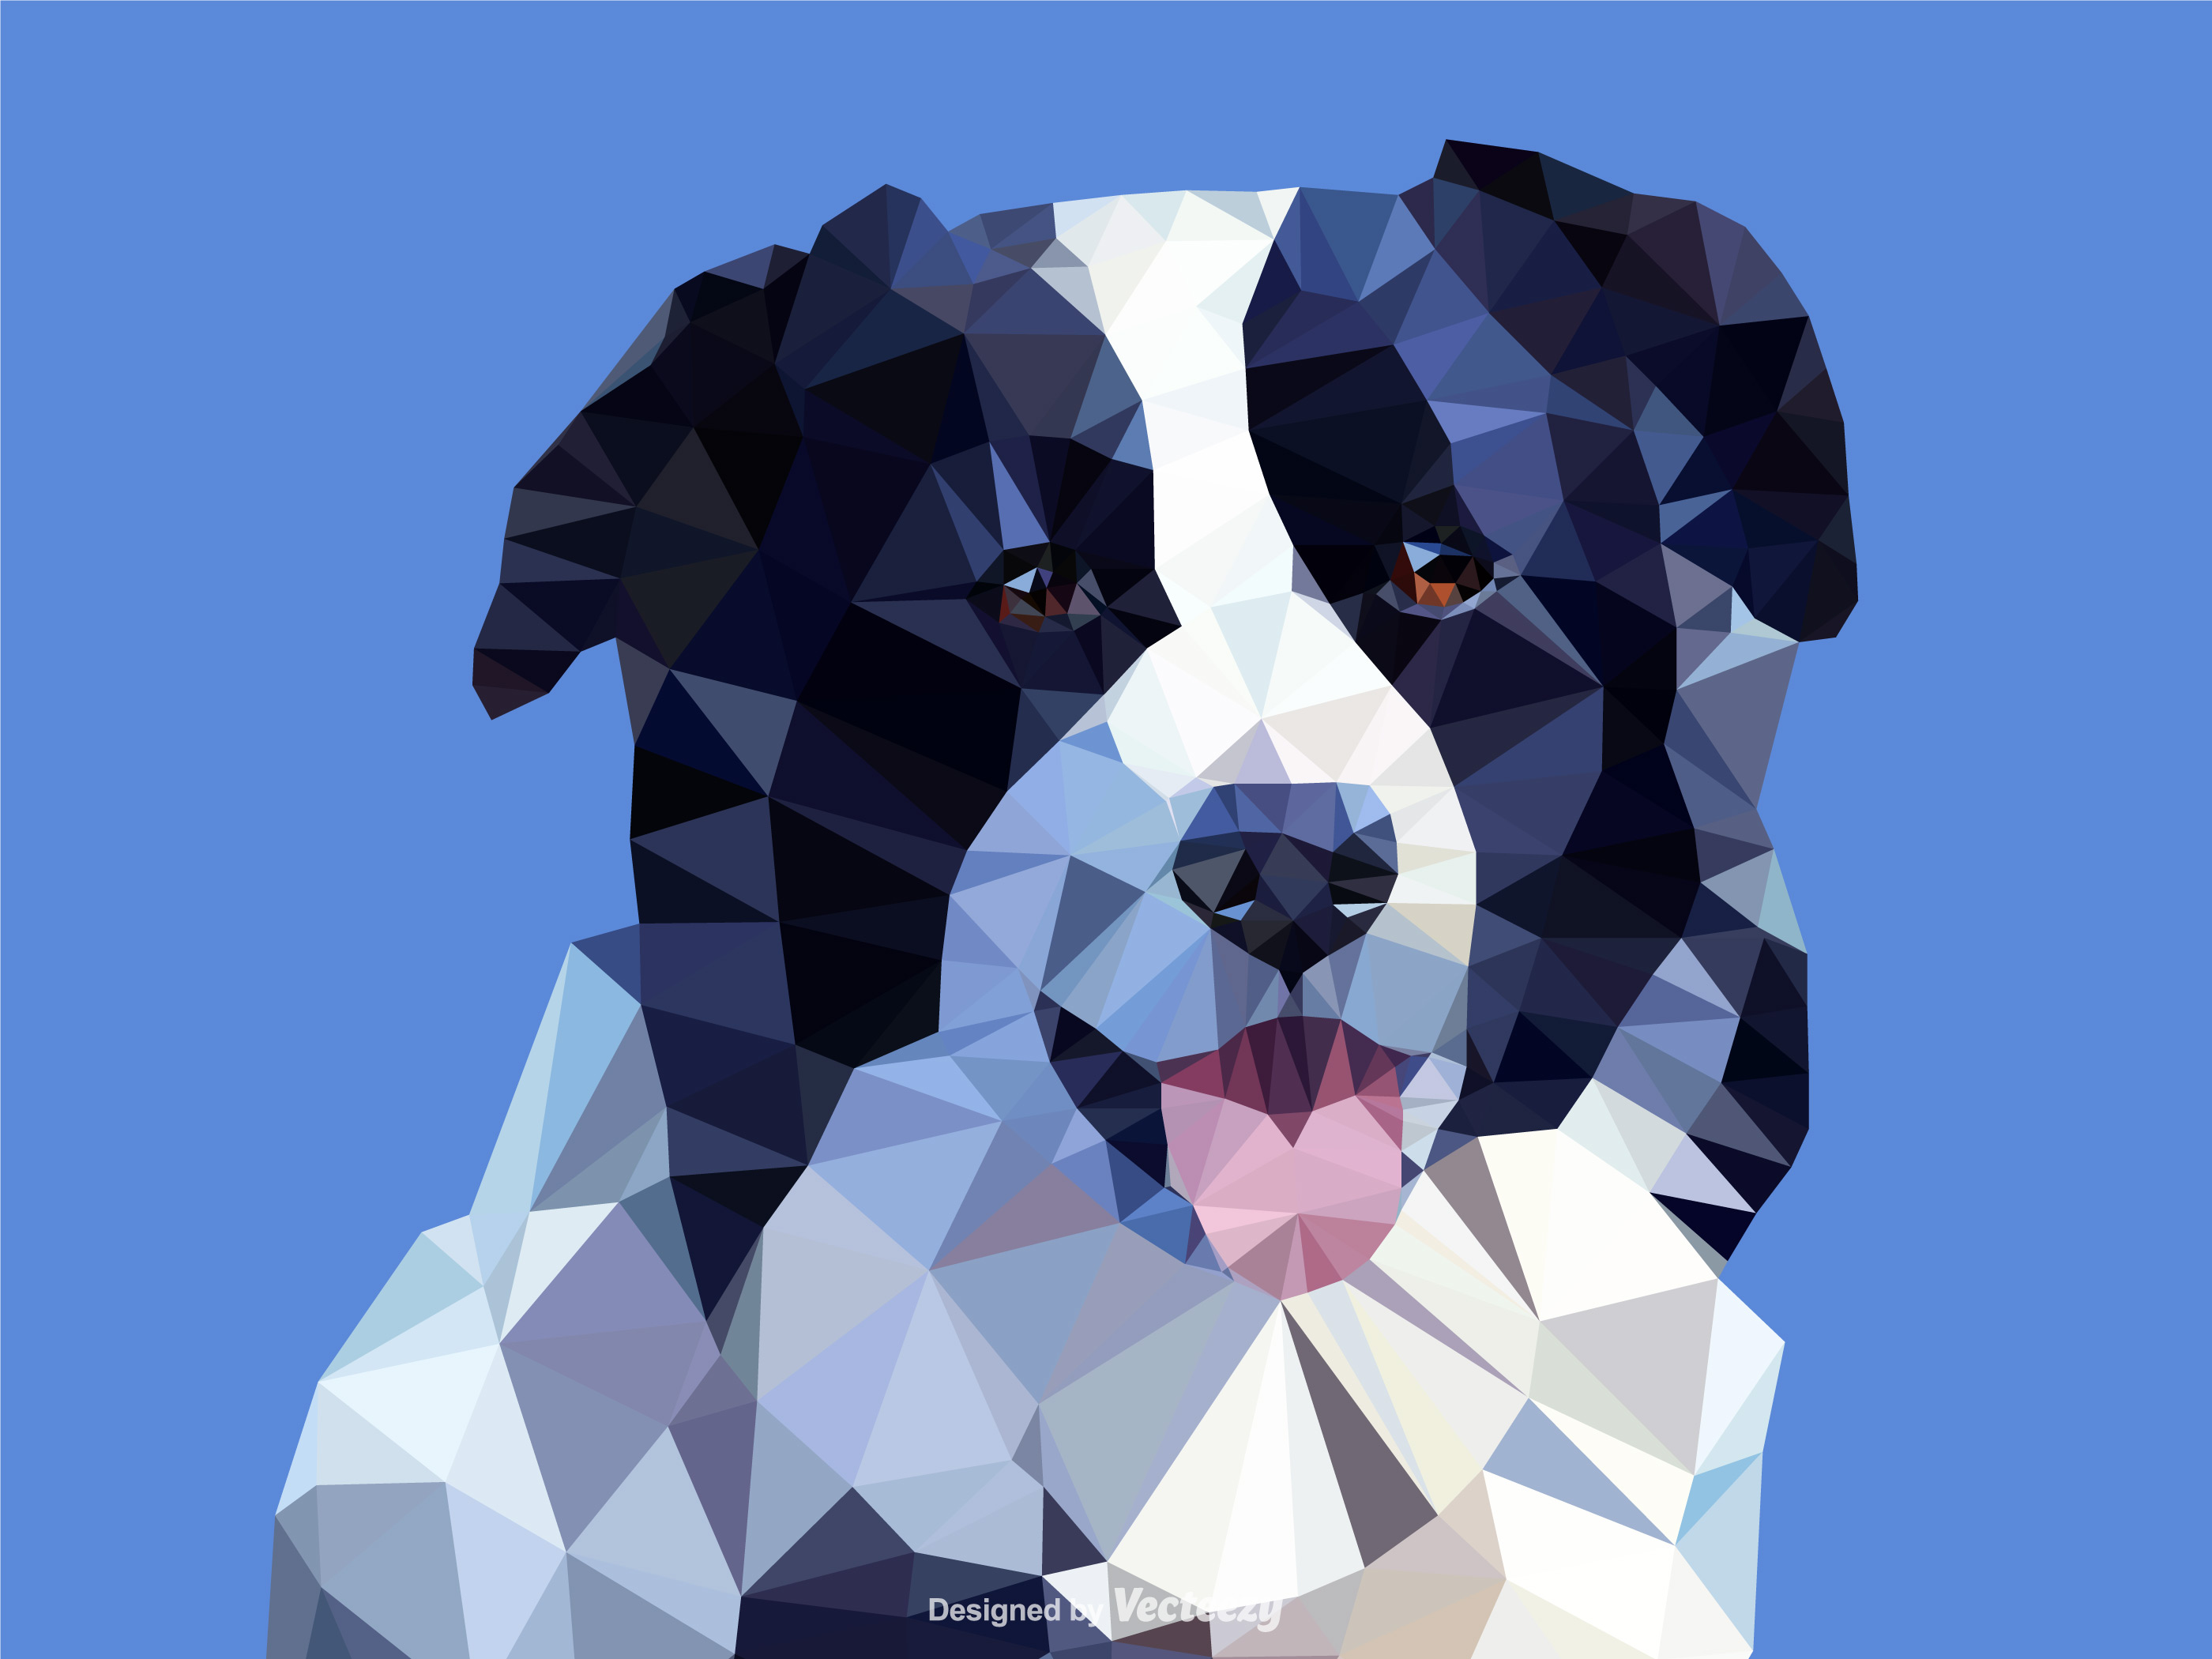 Concentration Uncertain educate Low Poly Animal Vector Art, Icons, and Graphics for Free Download